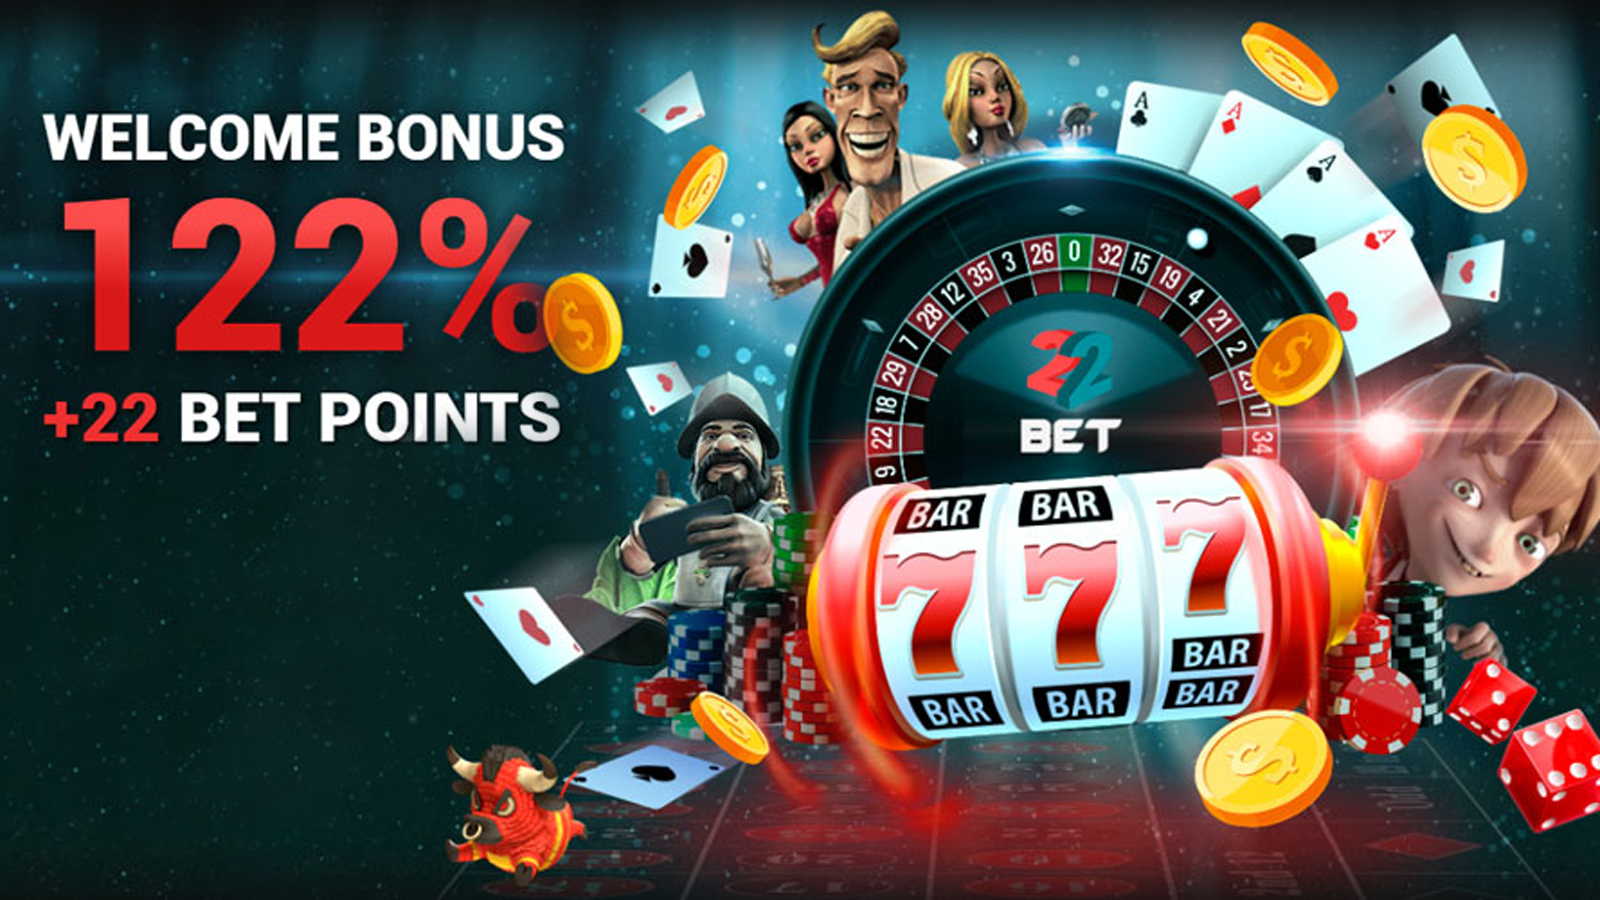 Sign up for 22bet Casino and receive your welcome bonus.